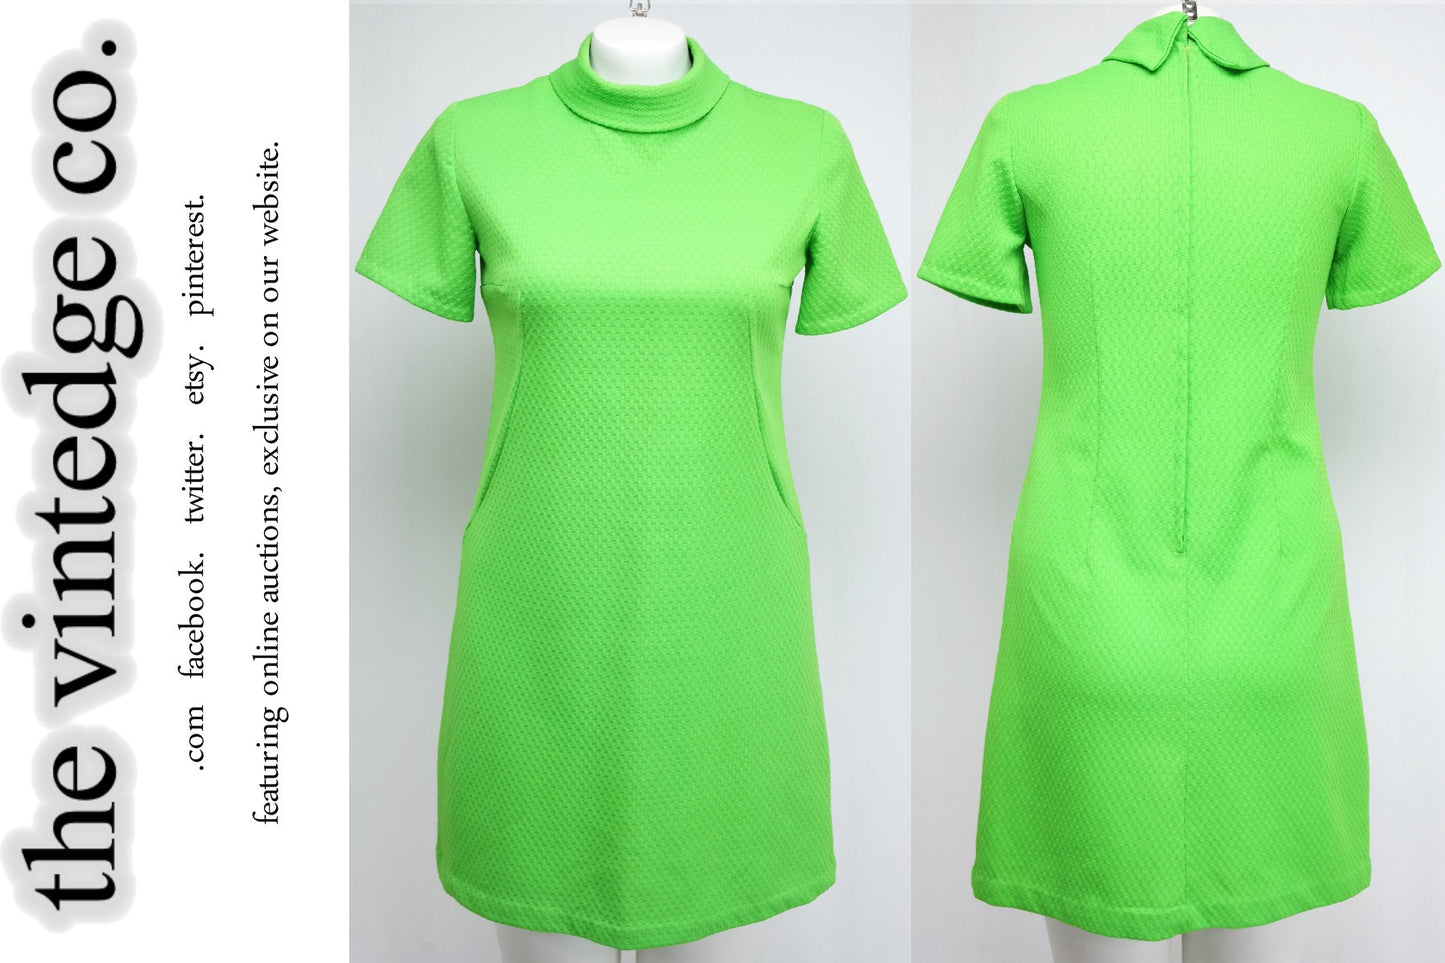 SOLD - Vintage Clothing - Womens - 50s 60s Mod Lime Green Mad Men Shift Dress 1X The Vintedge Co.